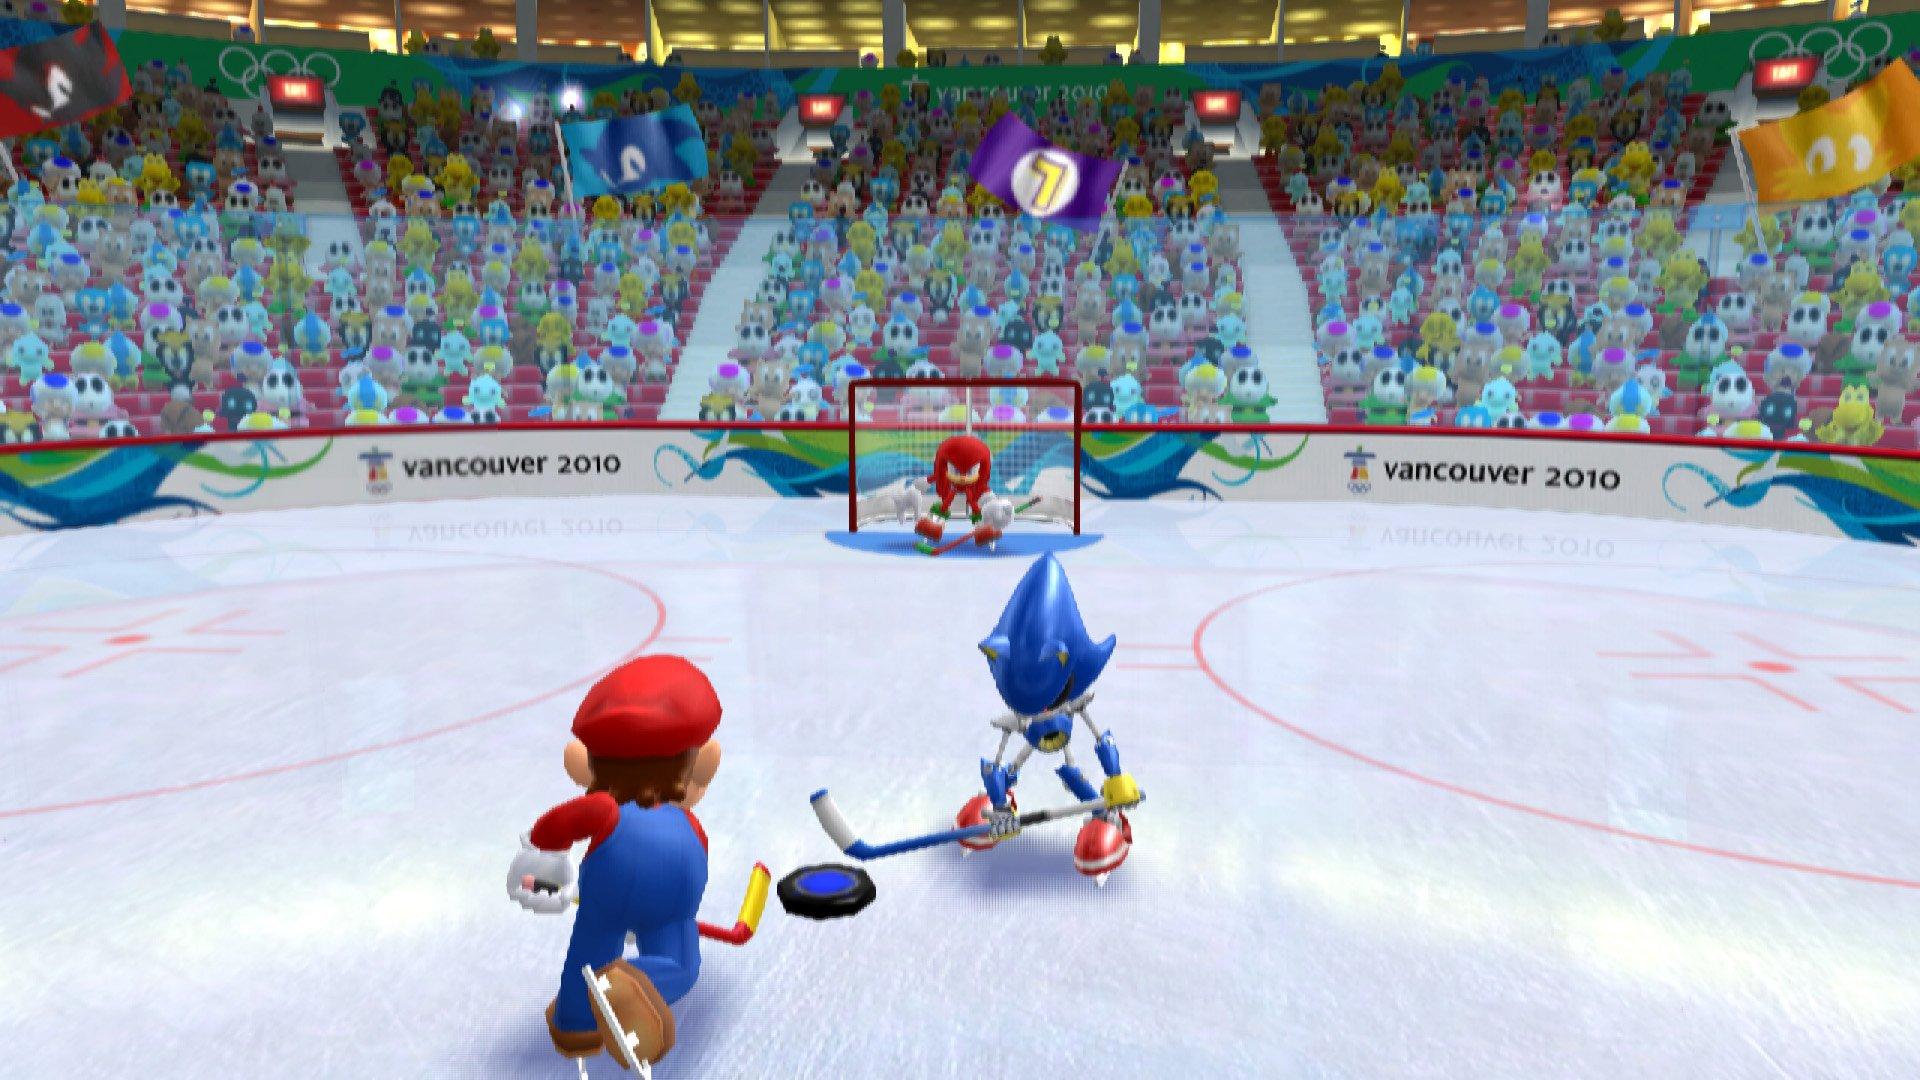 Mario and Sonic at the Winter Olympic Games - Nintendo DS | Nintendo DS |  GameStop